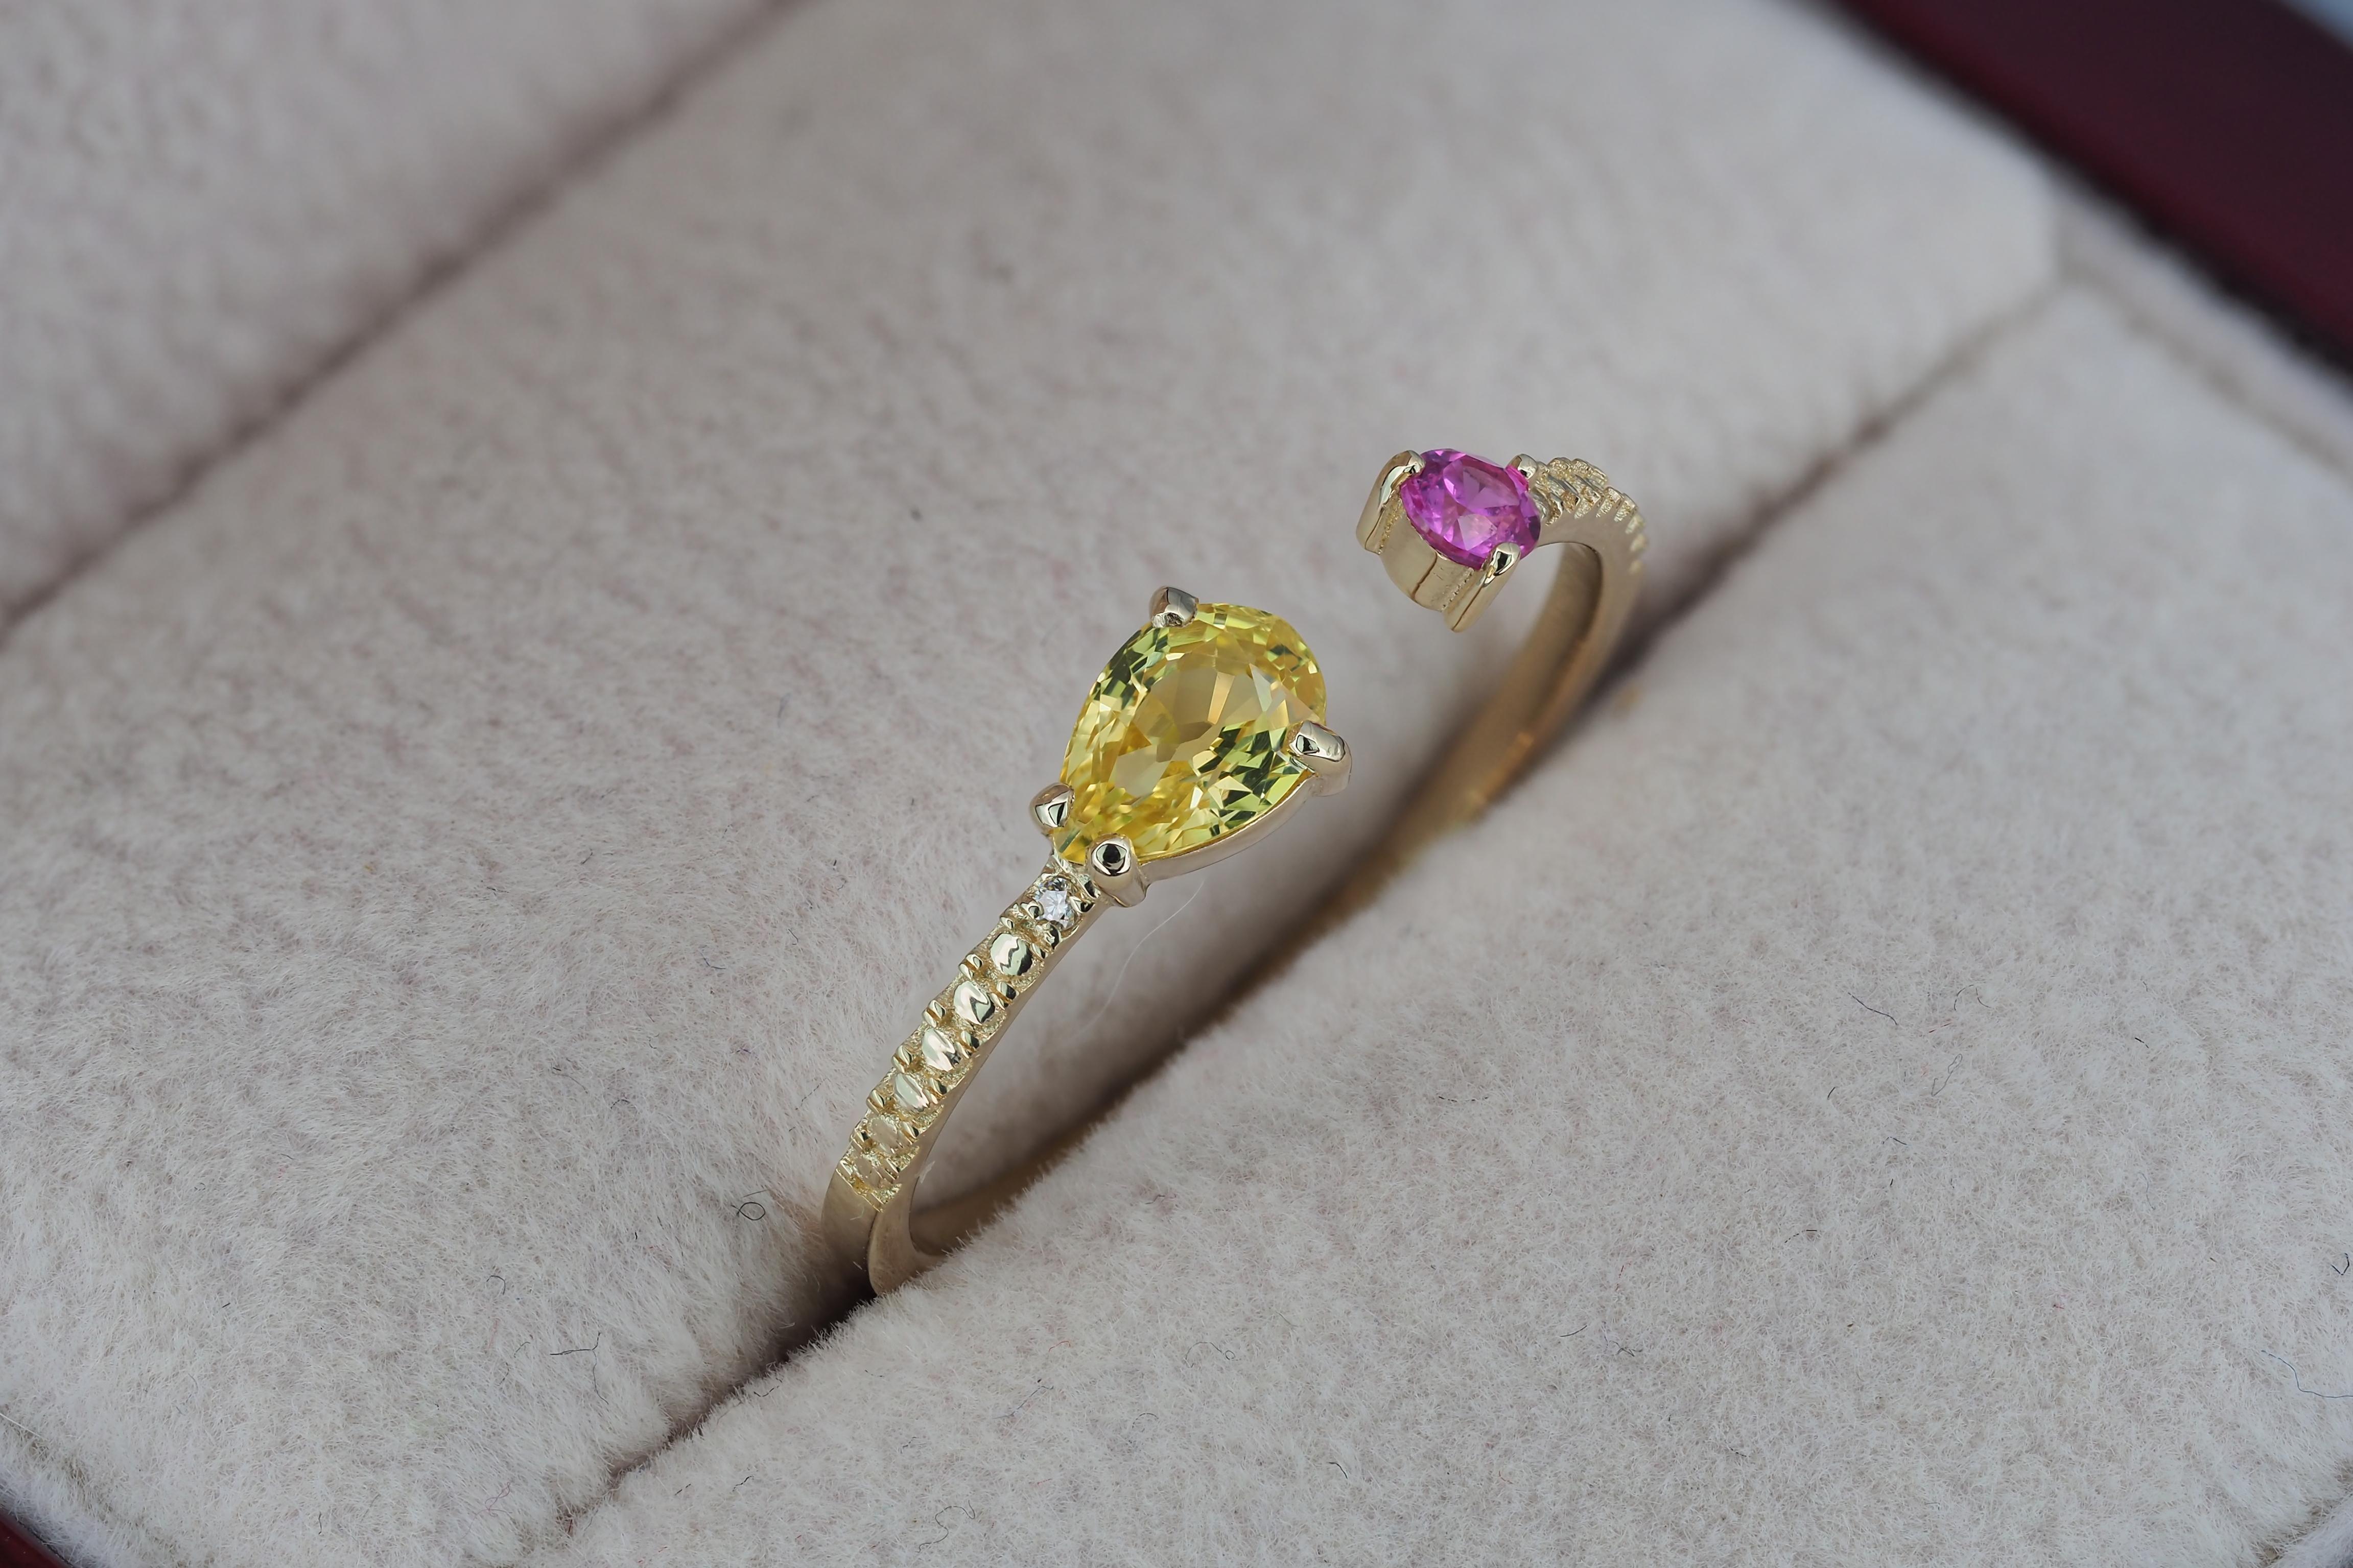 For Sale:  Open ended ring with yellow and pink sapphires 6